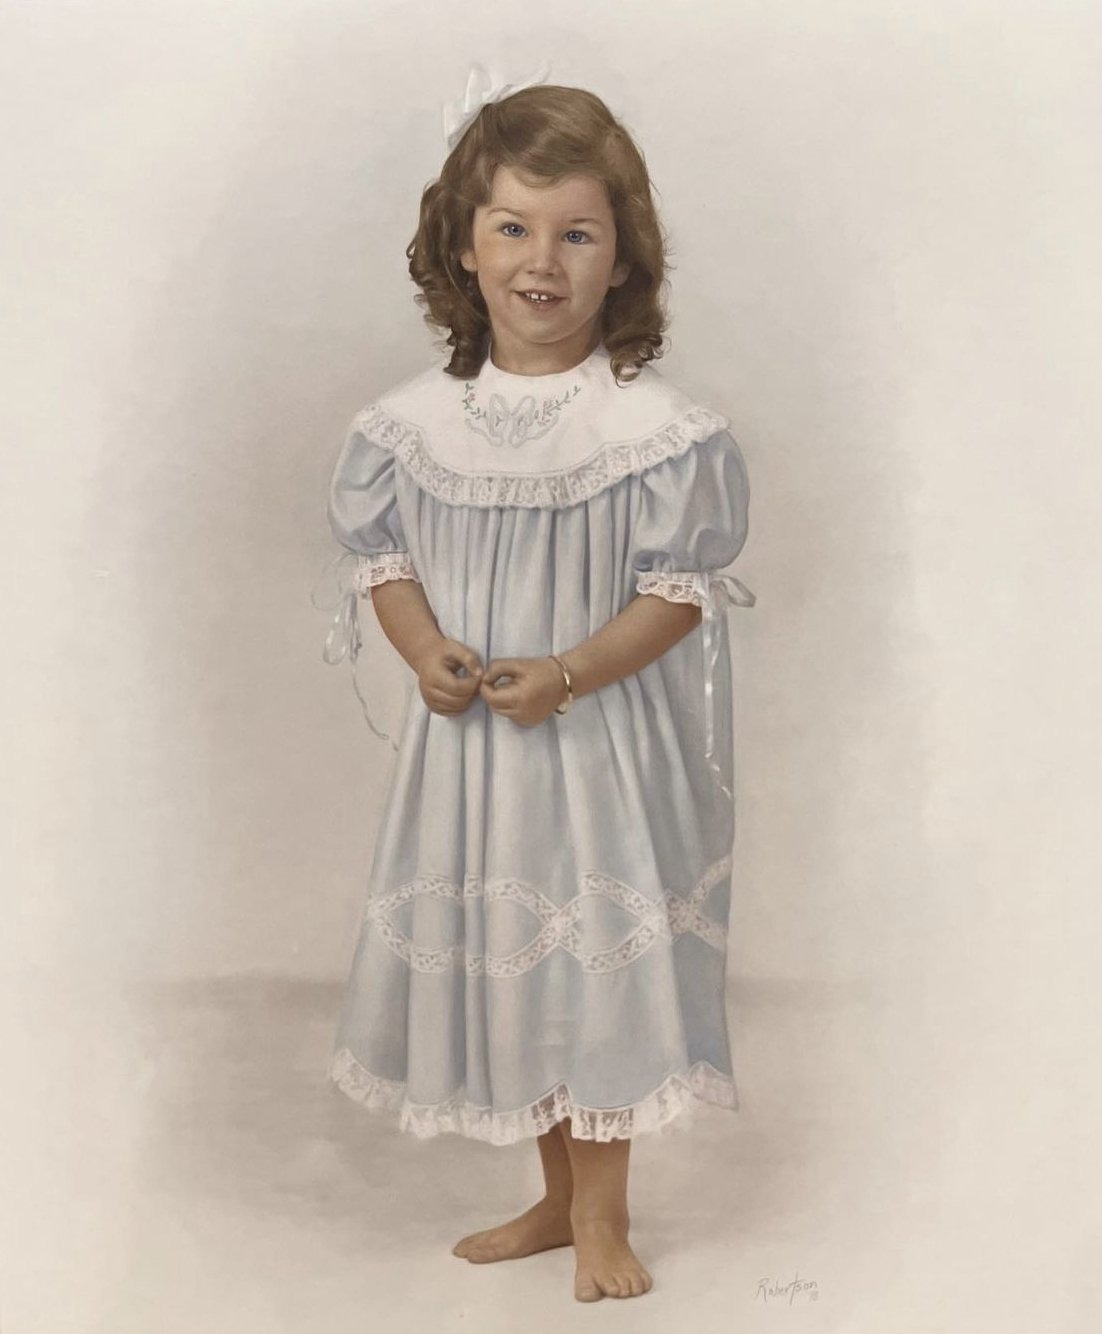 the original painting of her mom